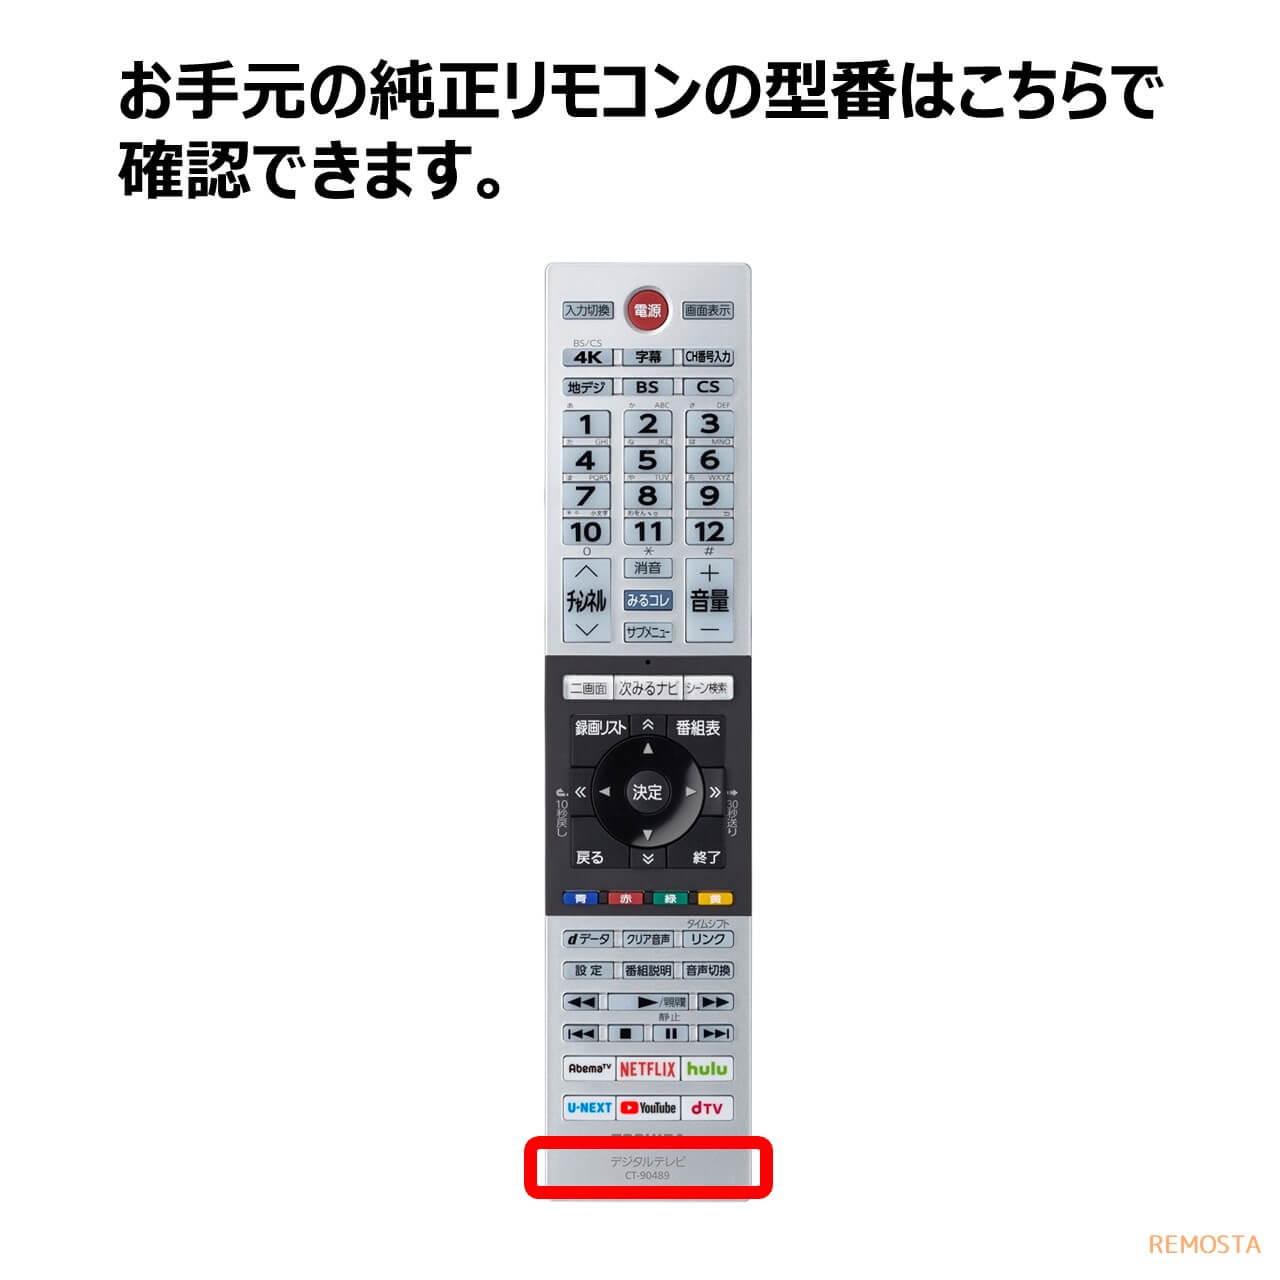 SALE／76%OFF】 AULCMEET テレビ用リモコン fit for 東芝CT-90494 CT